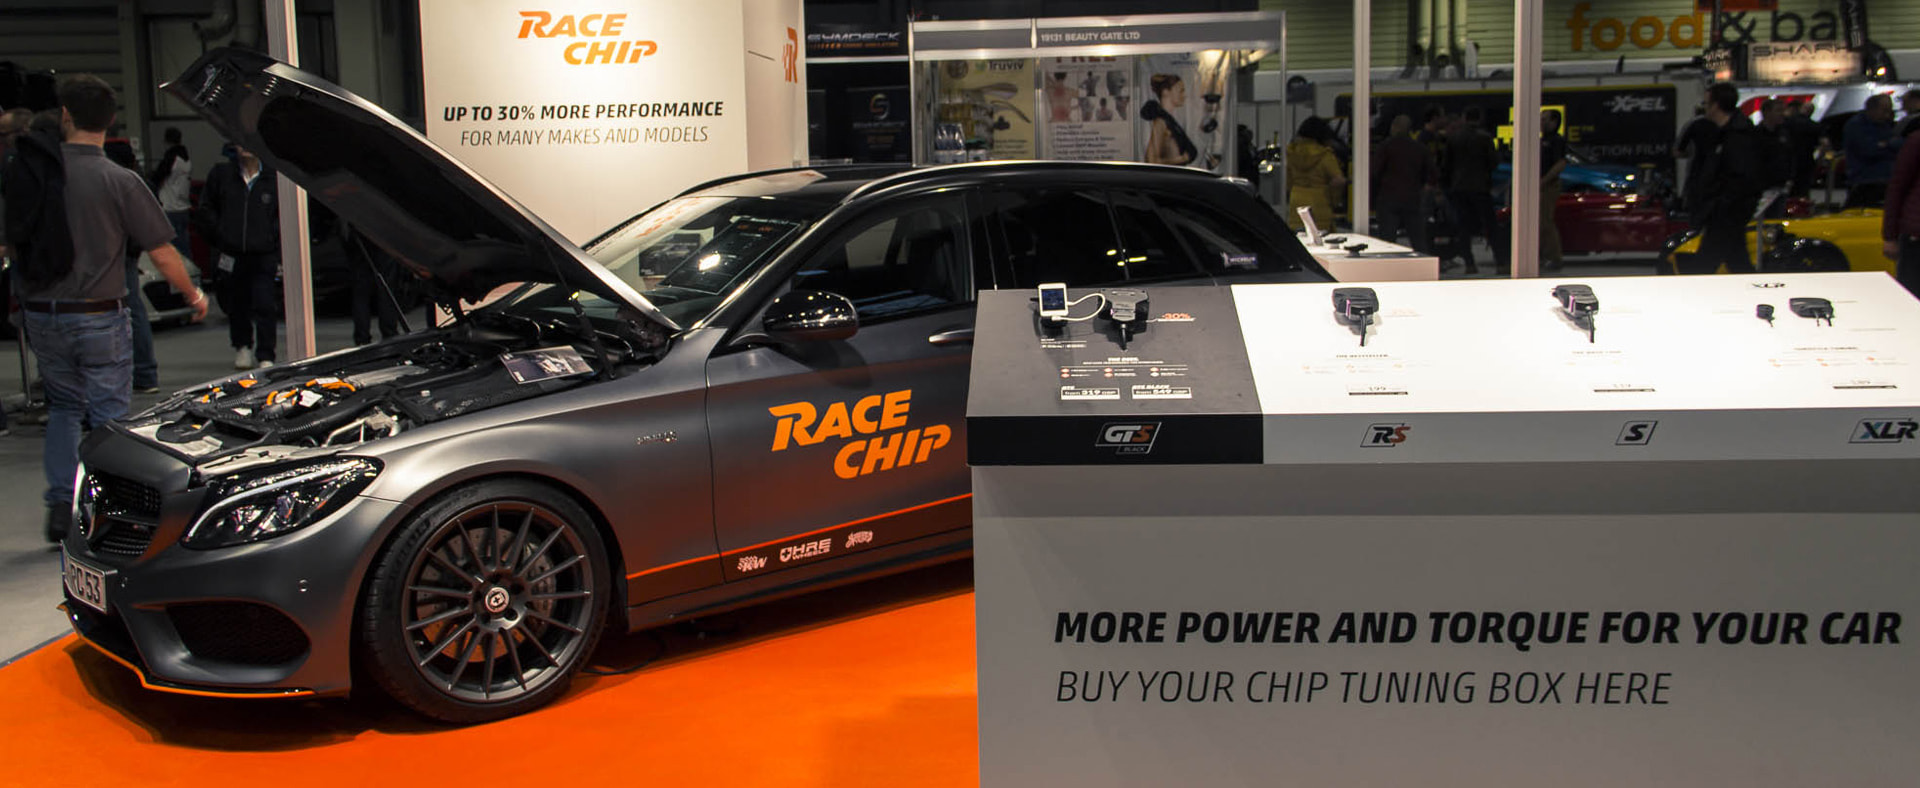 New RaceChip show car: a compact sports car with racing character